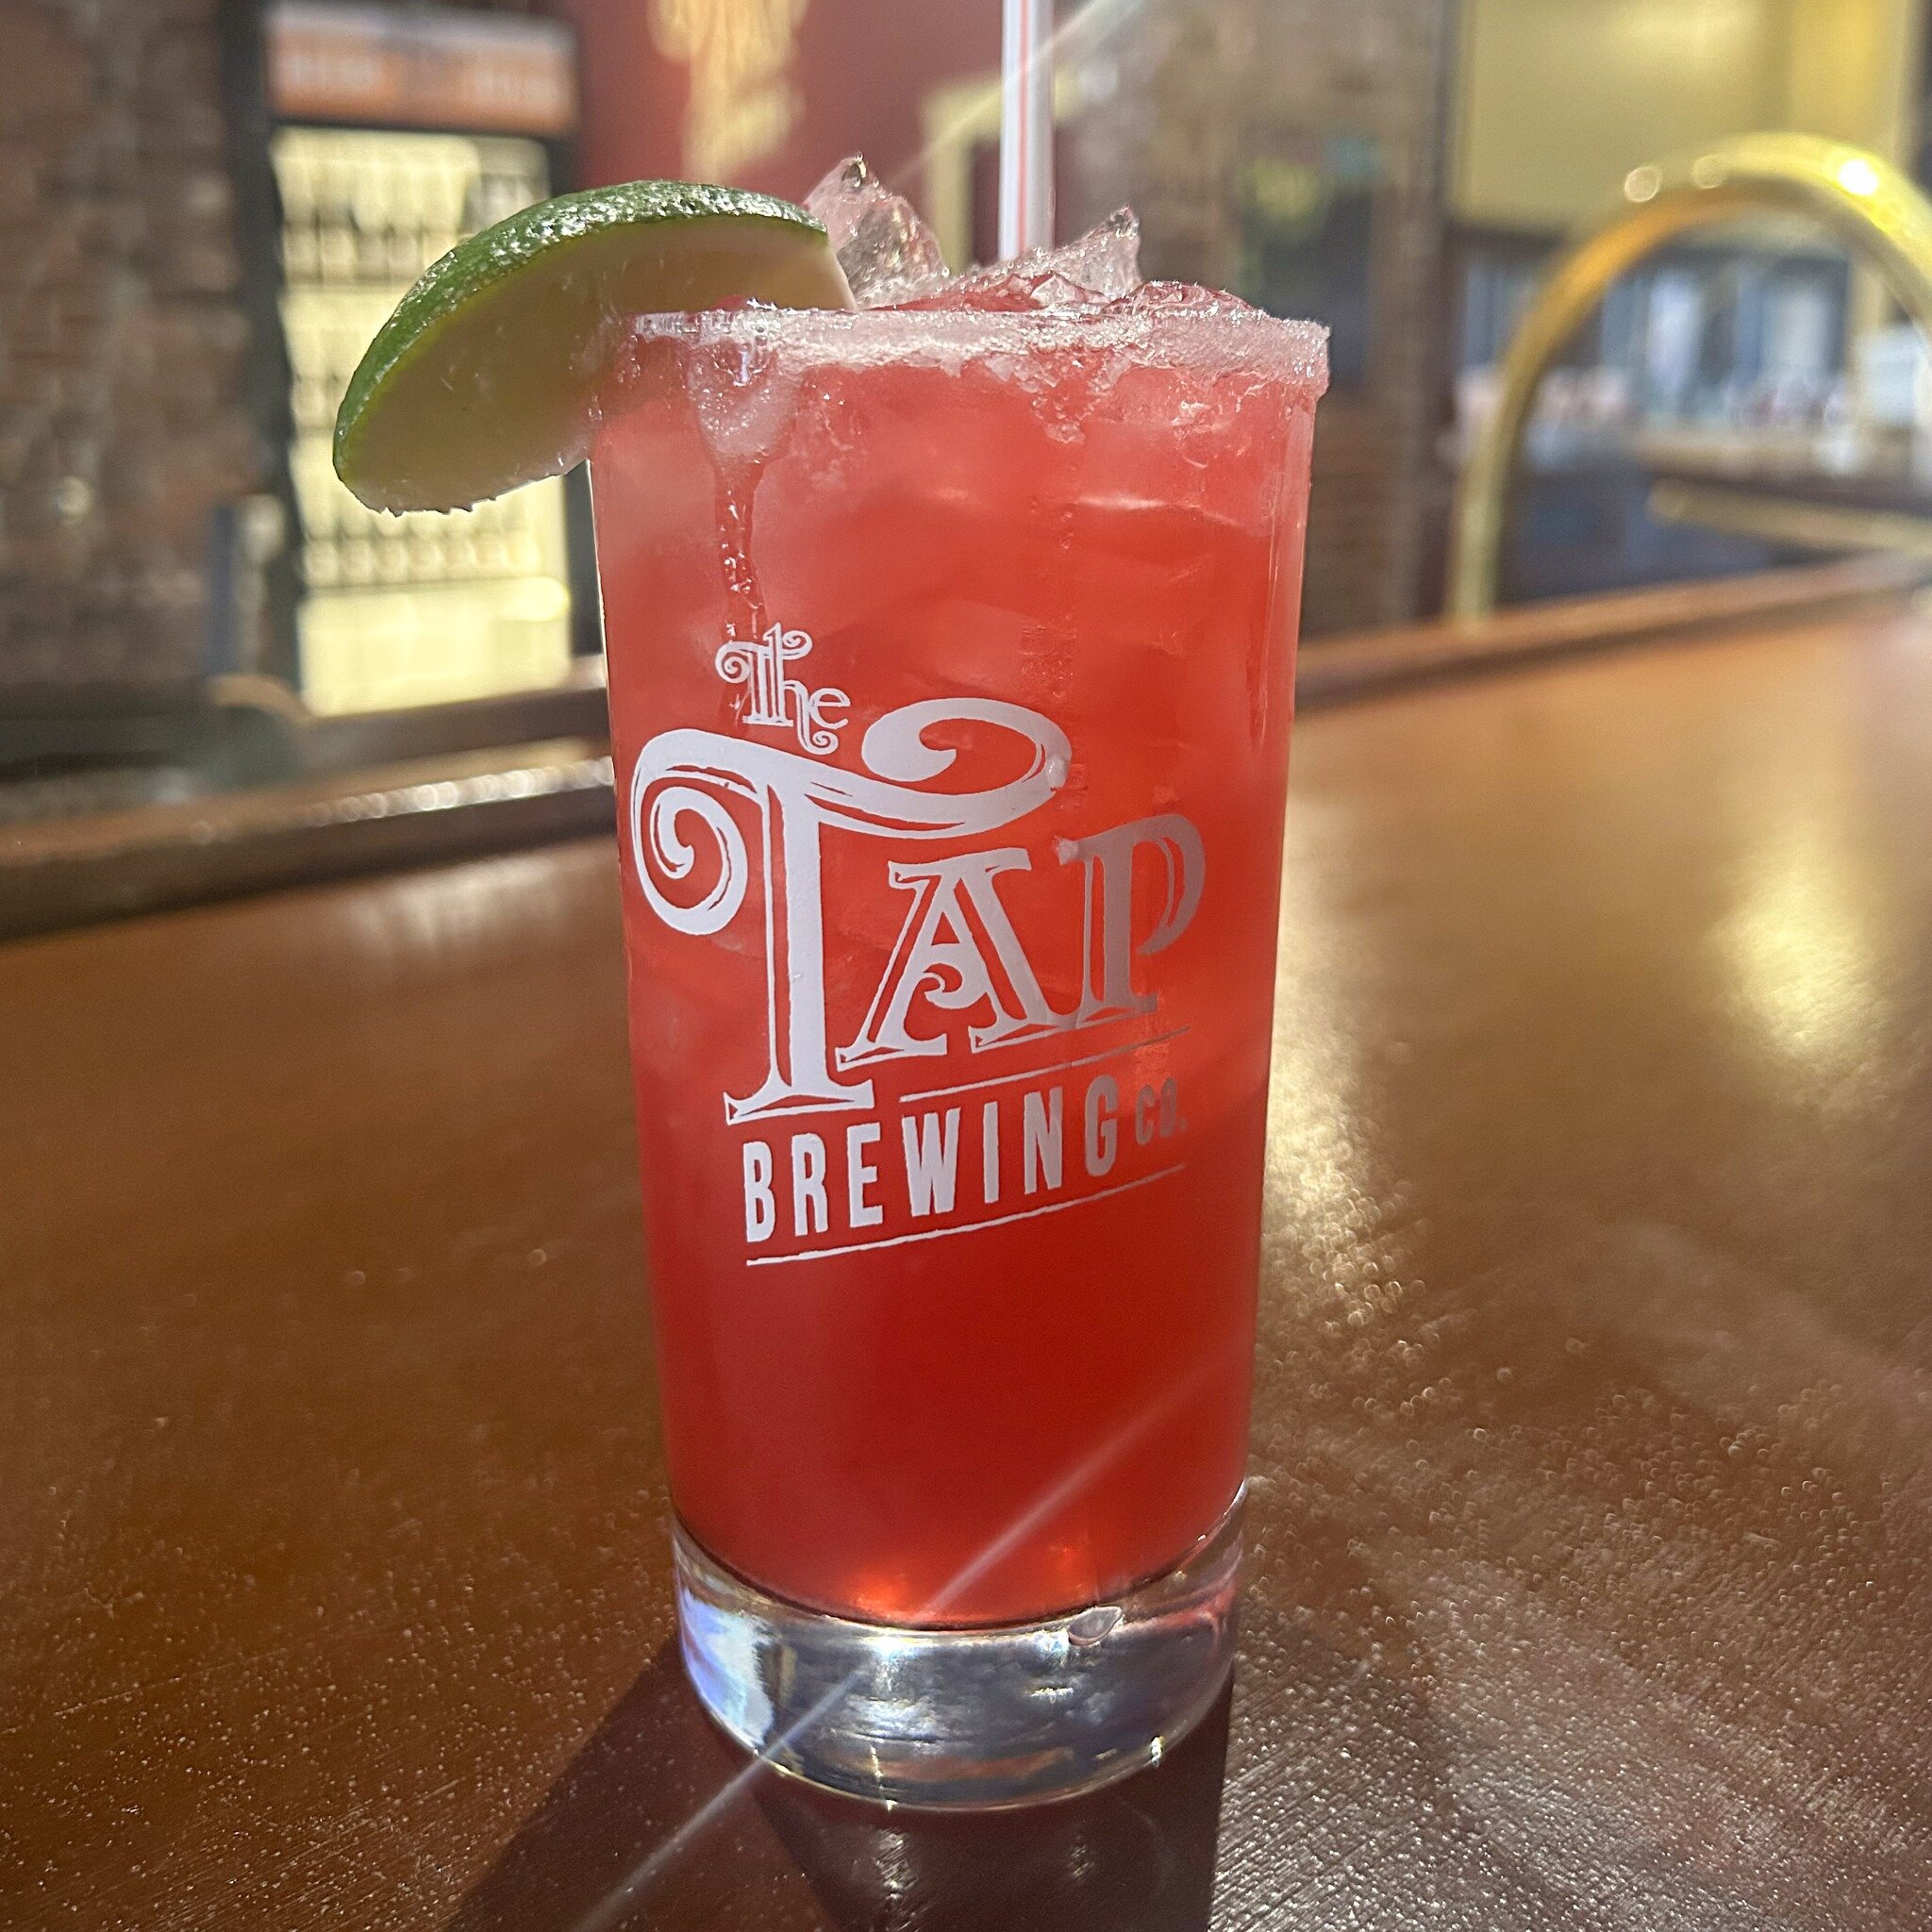 Feliz Cinco de Mayo! Our chef and bartenders whipped up the perfect specials to celebrate!! Come try them out.

Smoked Hibiscus Margarita- Avion tequila, Cointreau, fresh squeezed lemon and lime, hibiscus simple syrup, smoked with a salt/sugar rim 
C